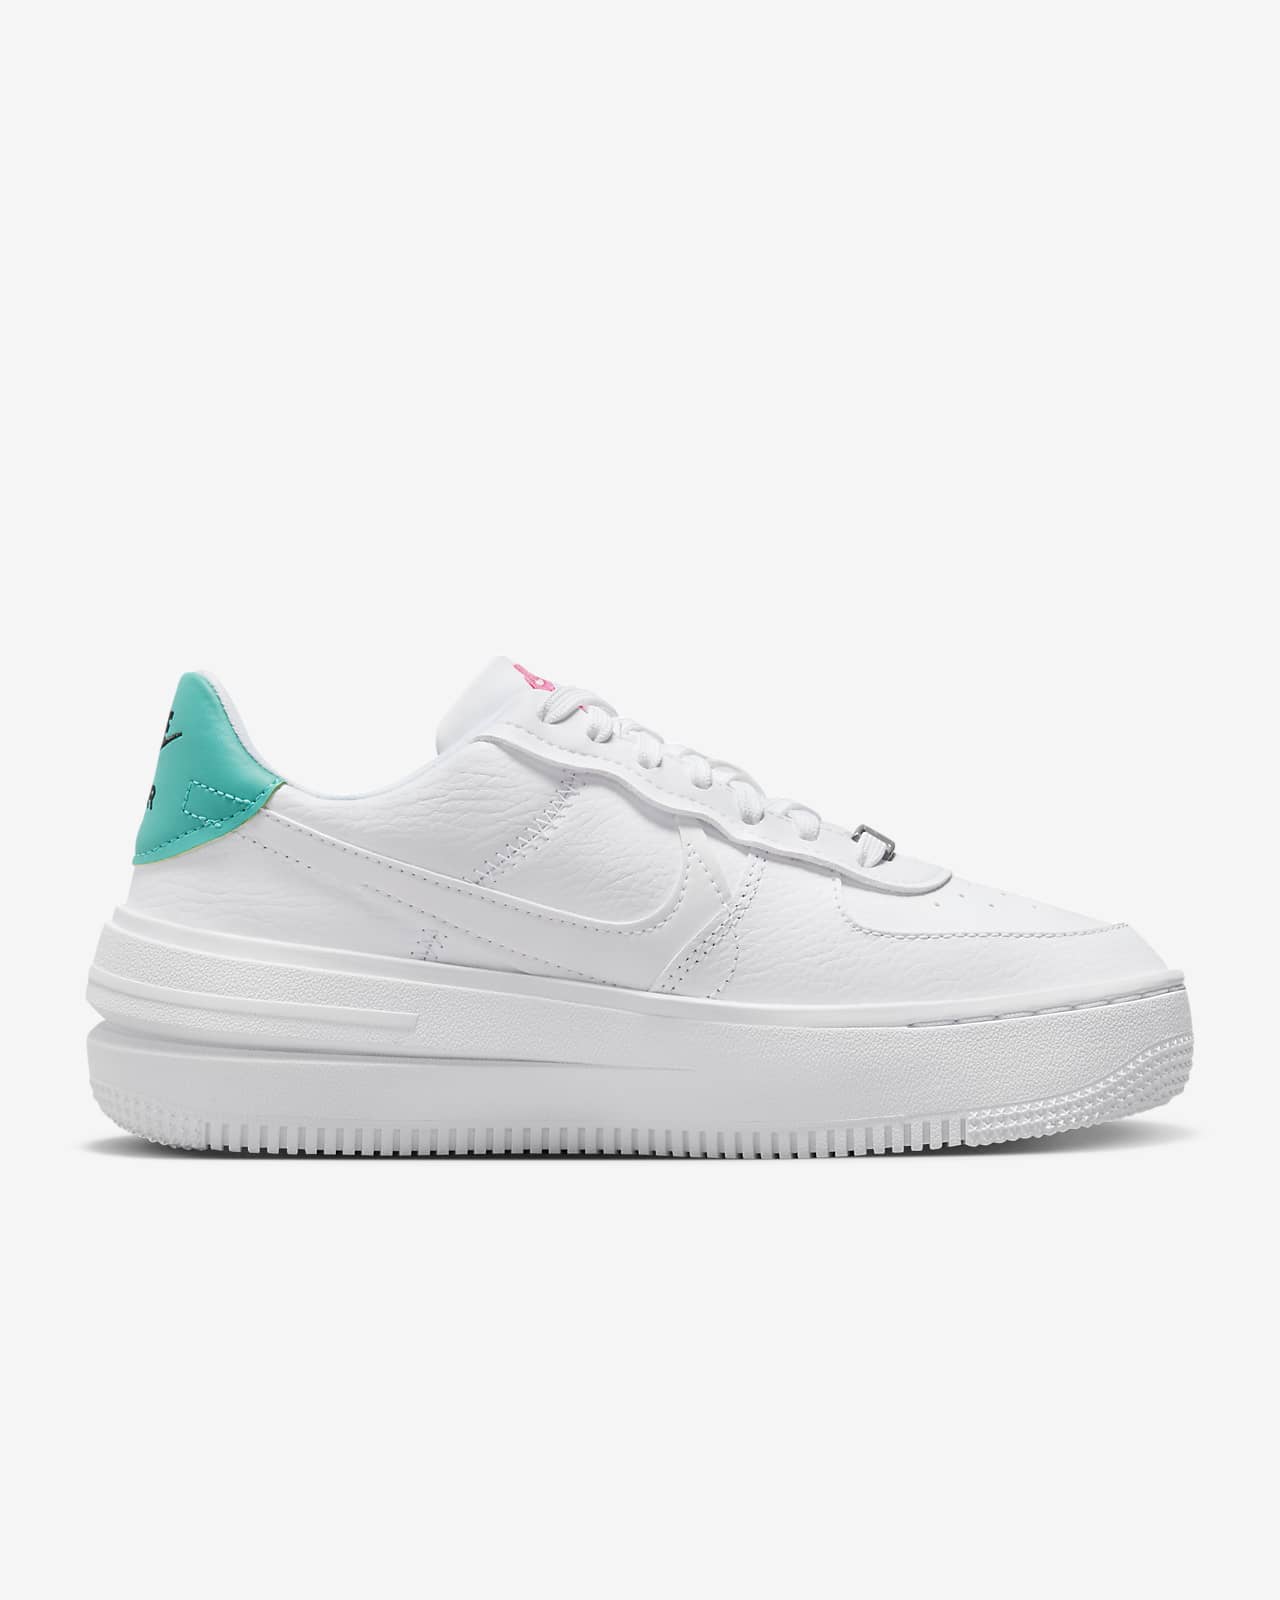 Nike Women's Air Force 1 PLT.AF.ORM Shoes, Size 8.5, White/White/White